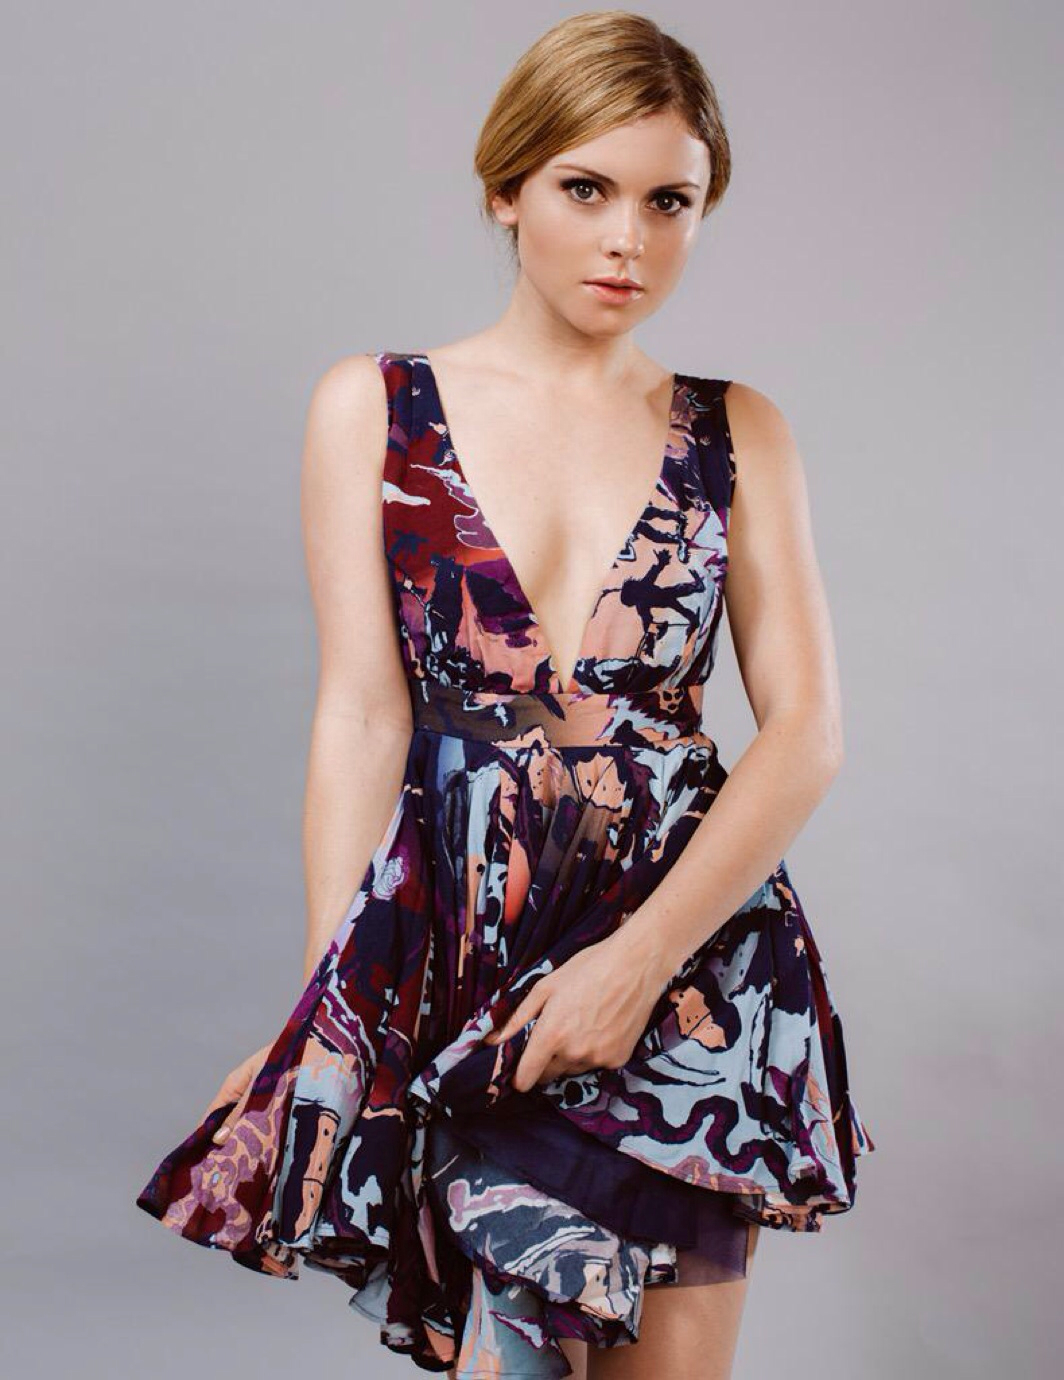 19 Rose McIver Hottest Photos Gallery LATEST Images Pics 8